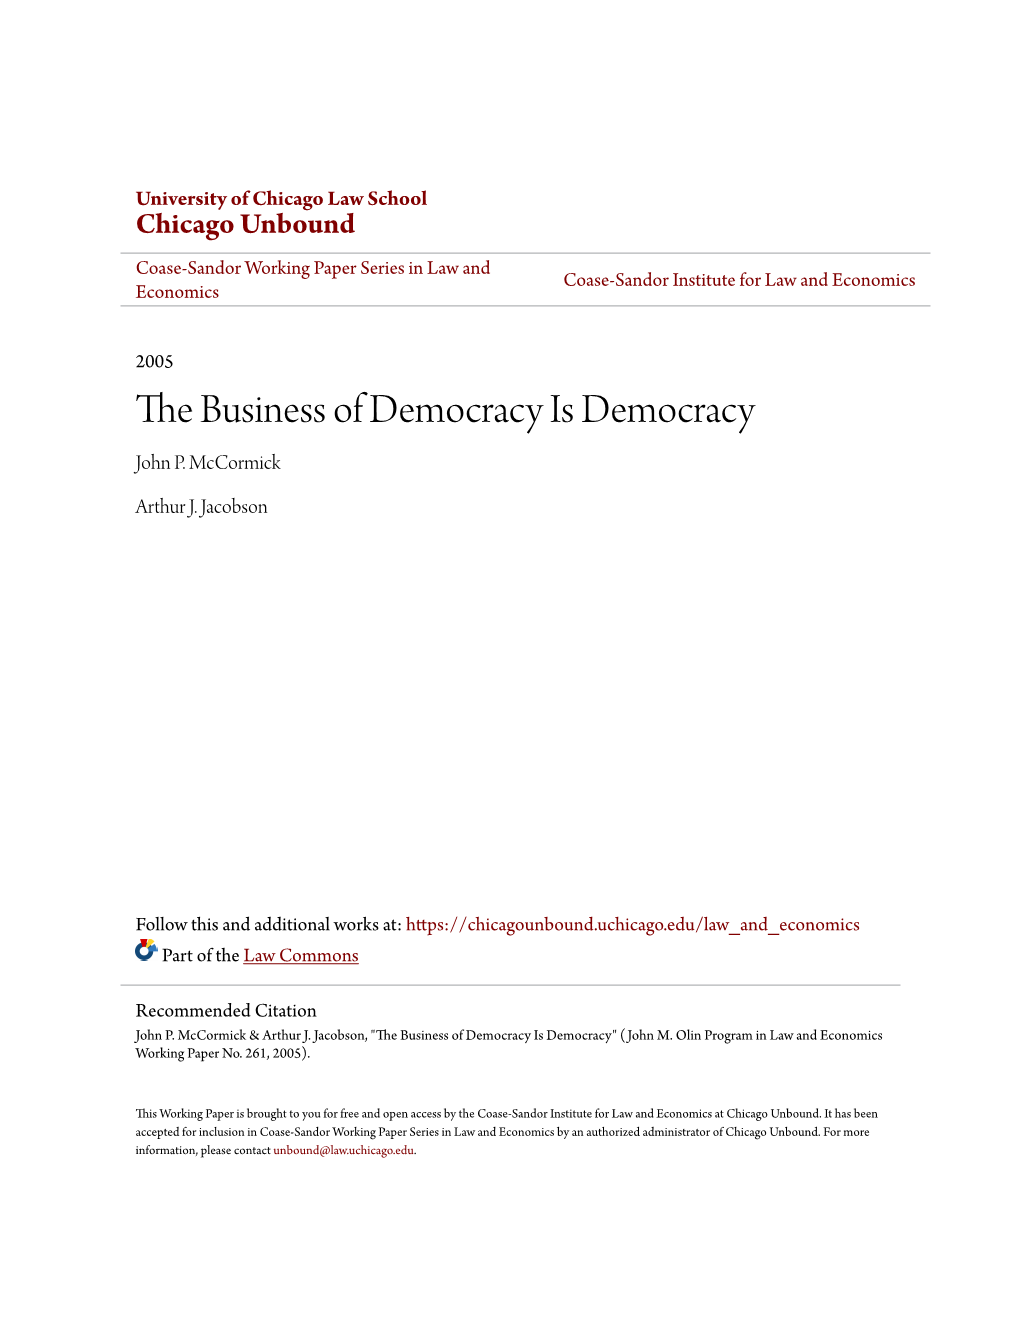 The Business of Democracy Is Democracy